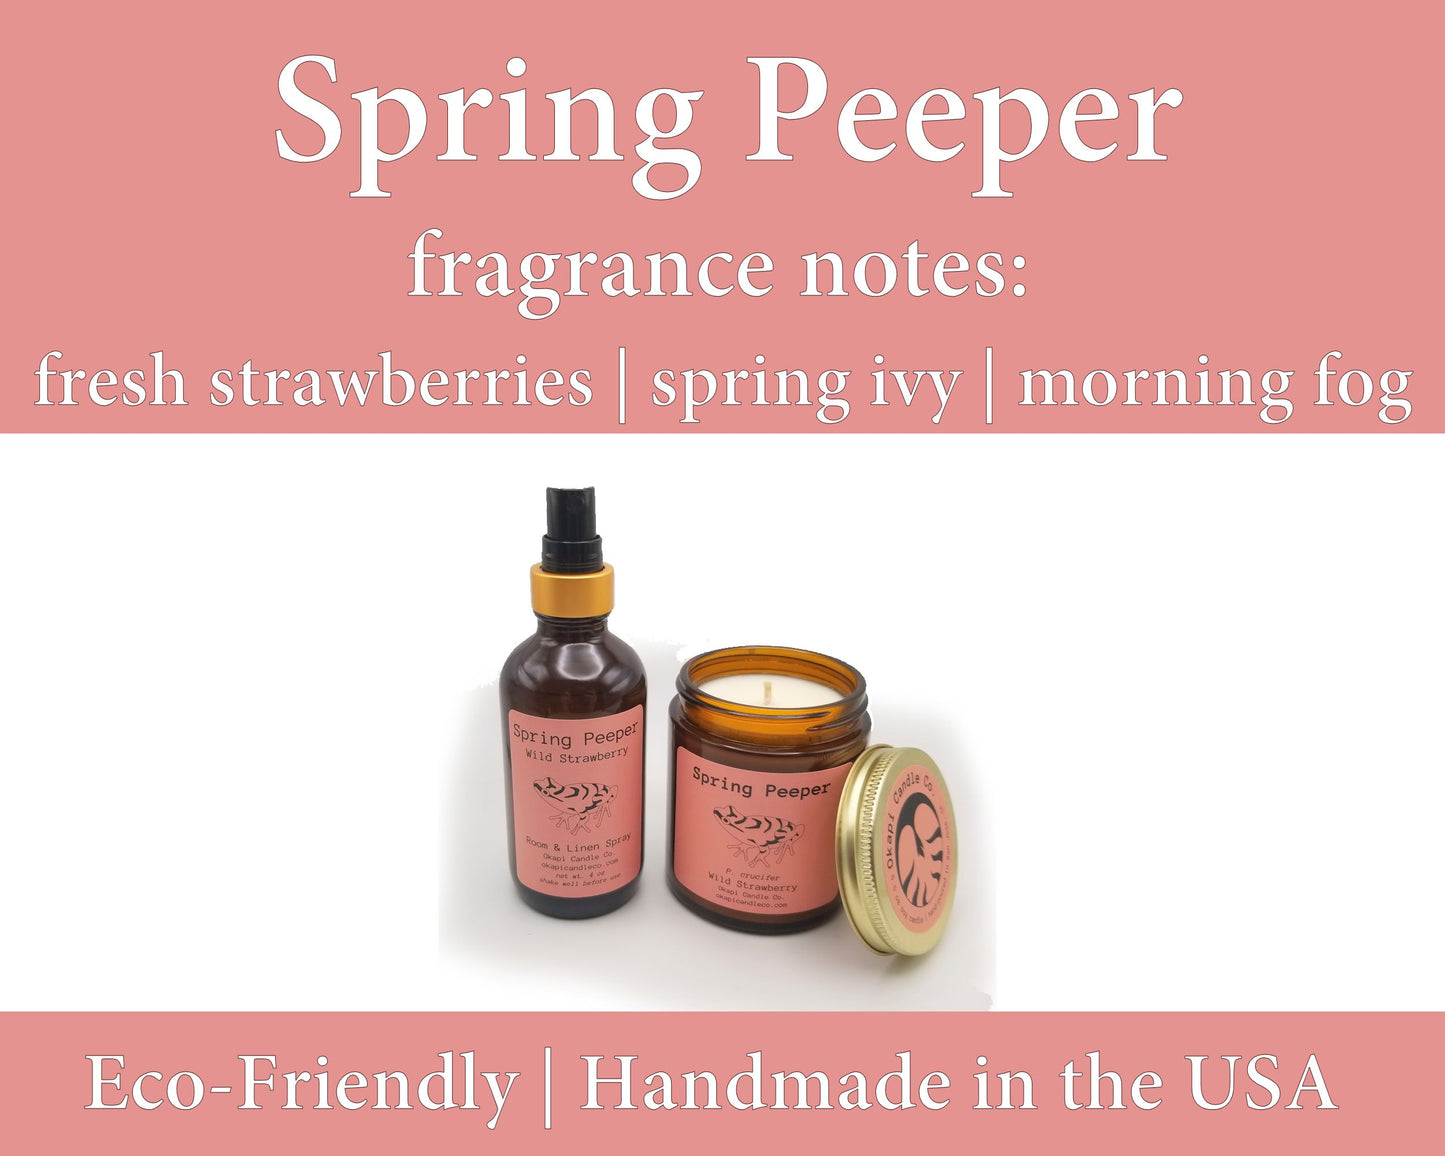 Spring Peeper Frog Inspired Soy Candle - Wild Strawberry Fragrance